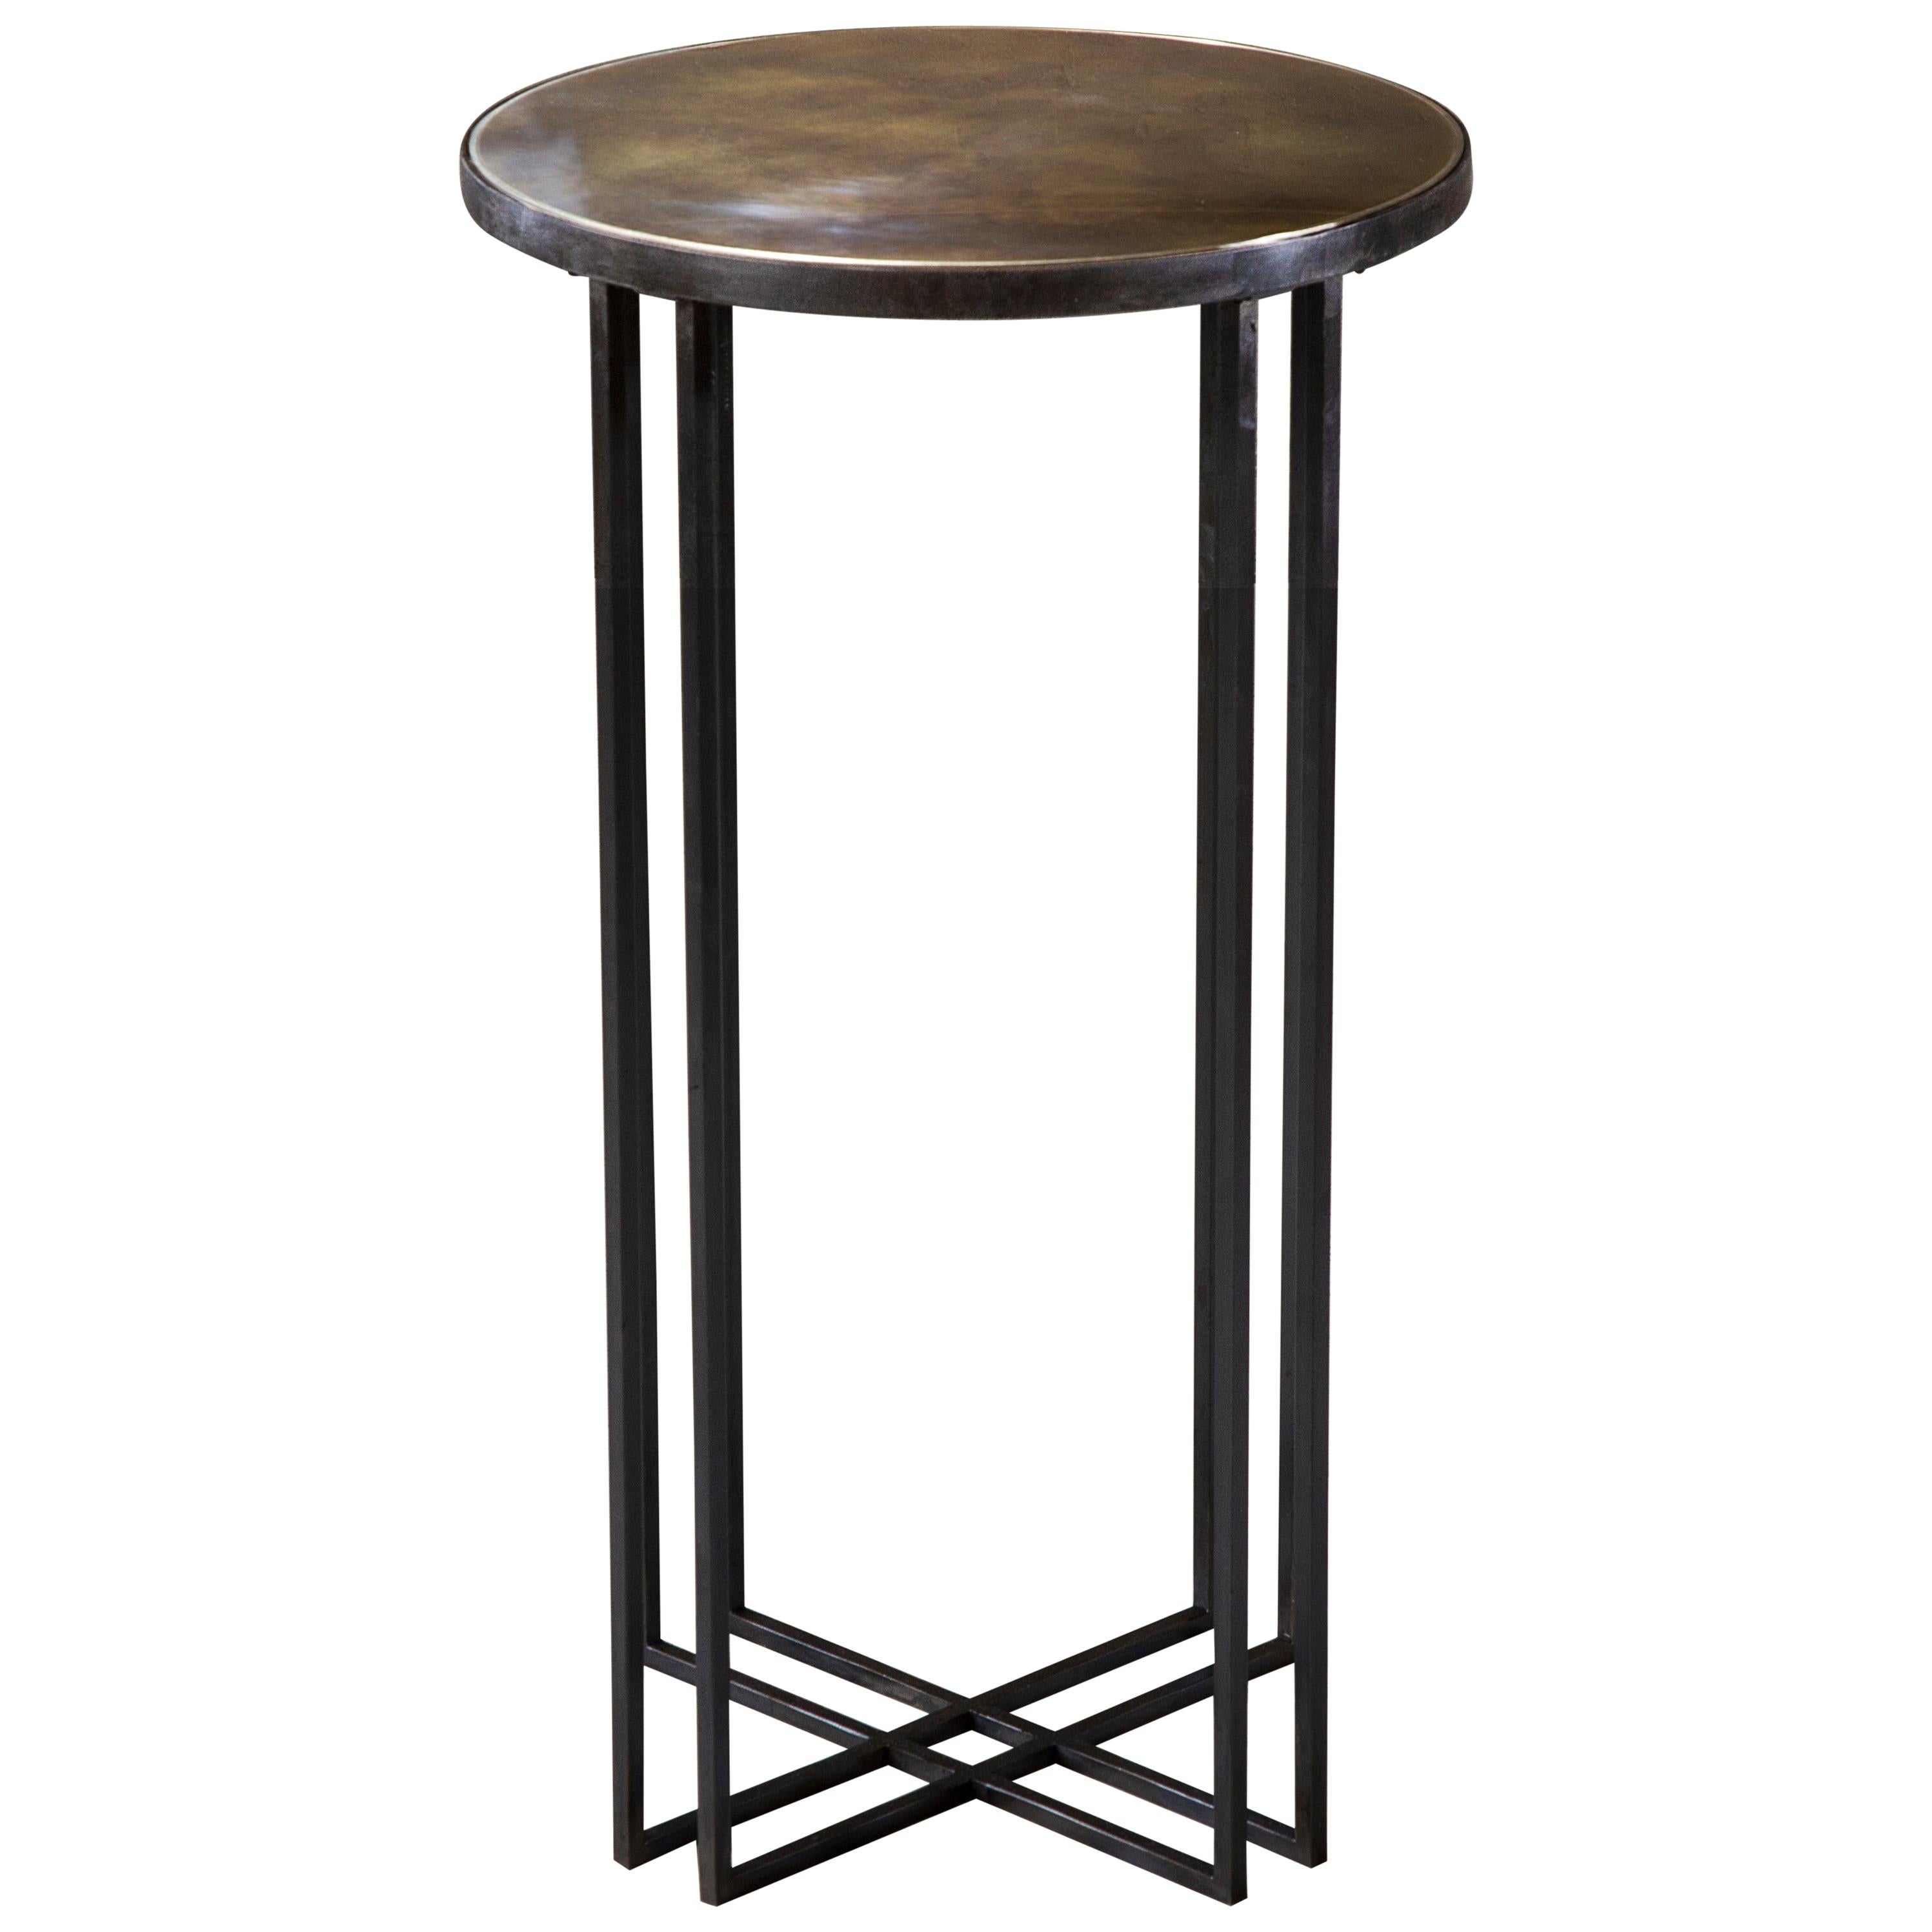 Richy Almond Side Tables